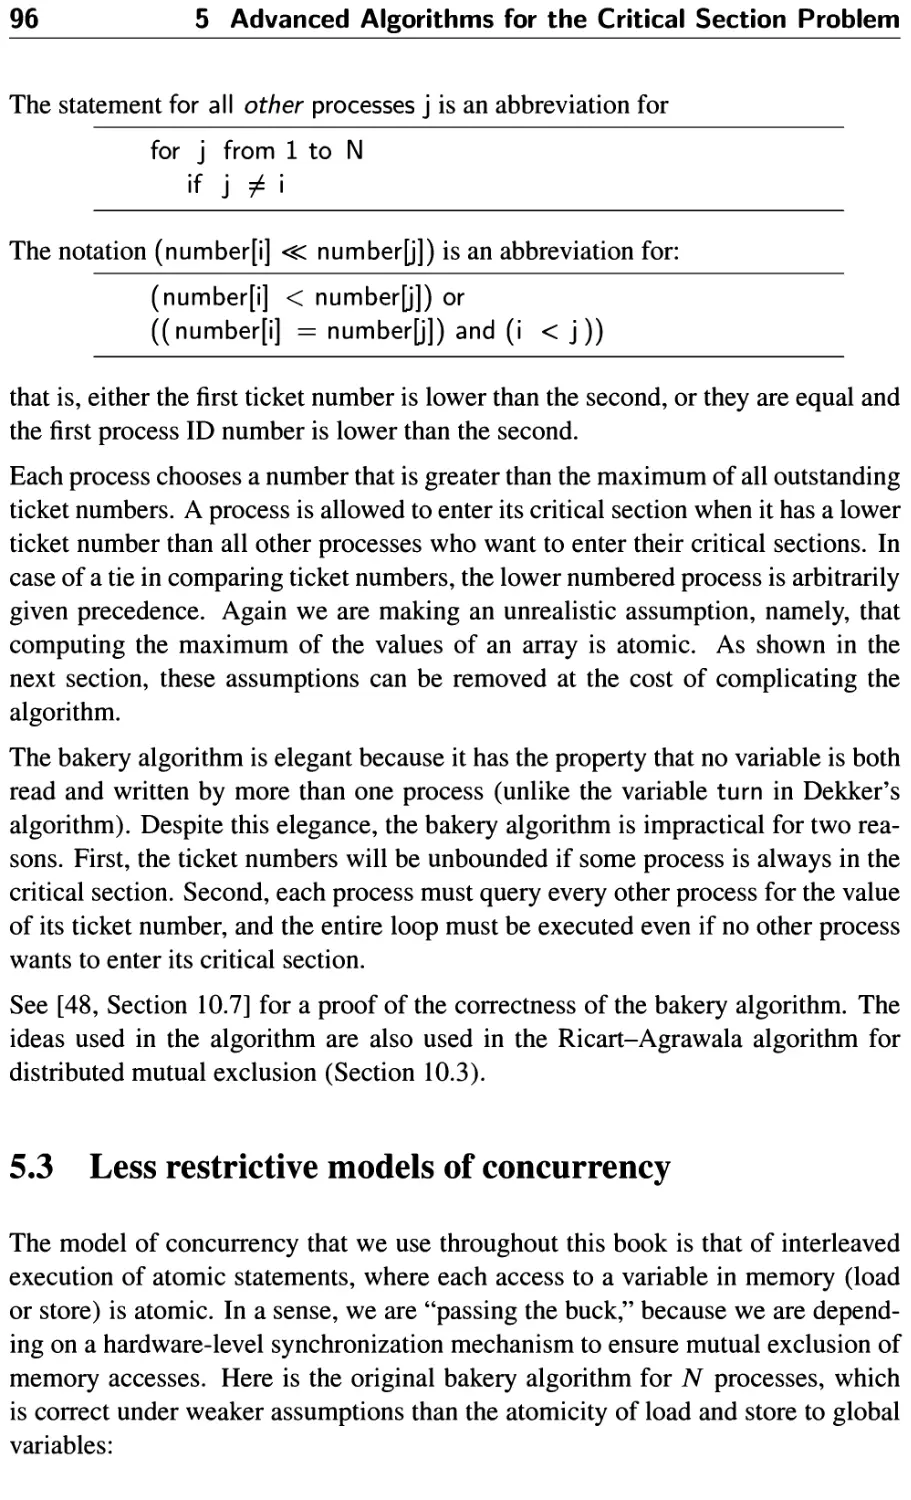 5.3 Less restrictive models of concurrency